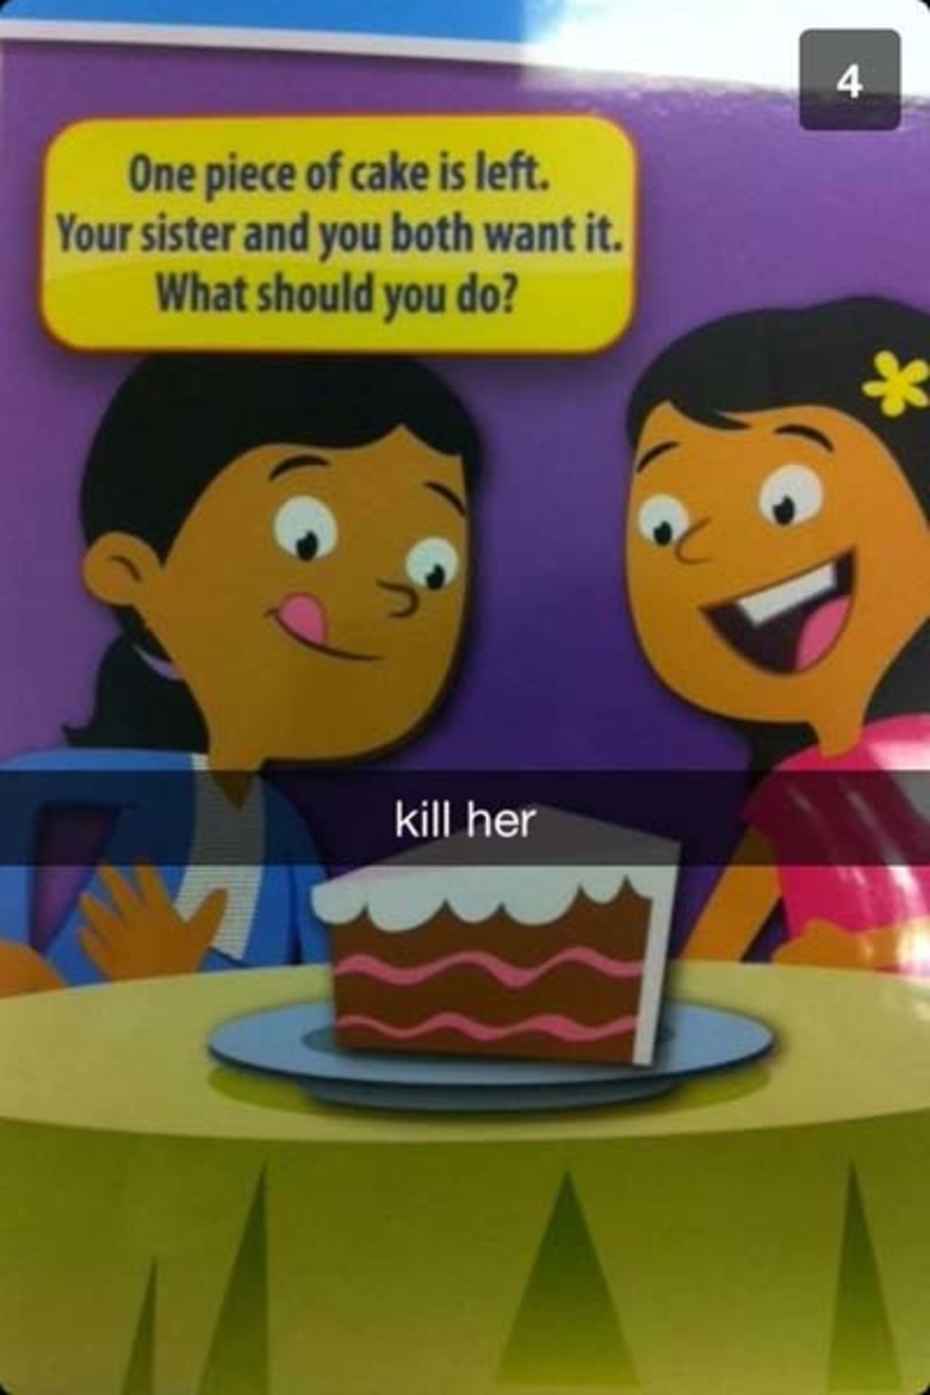 snapchat cringe thinking about you scooby doo snapchat - One piece of cake is left. Your sister and you both want it. What should you do? kill her